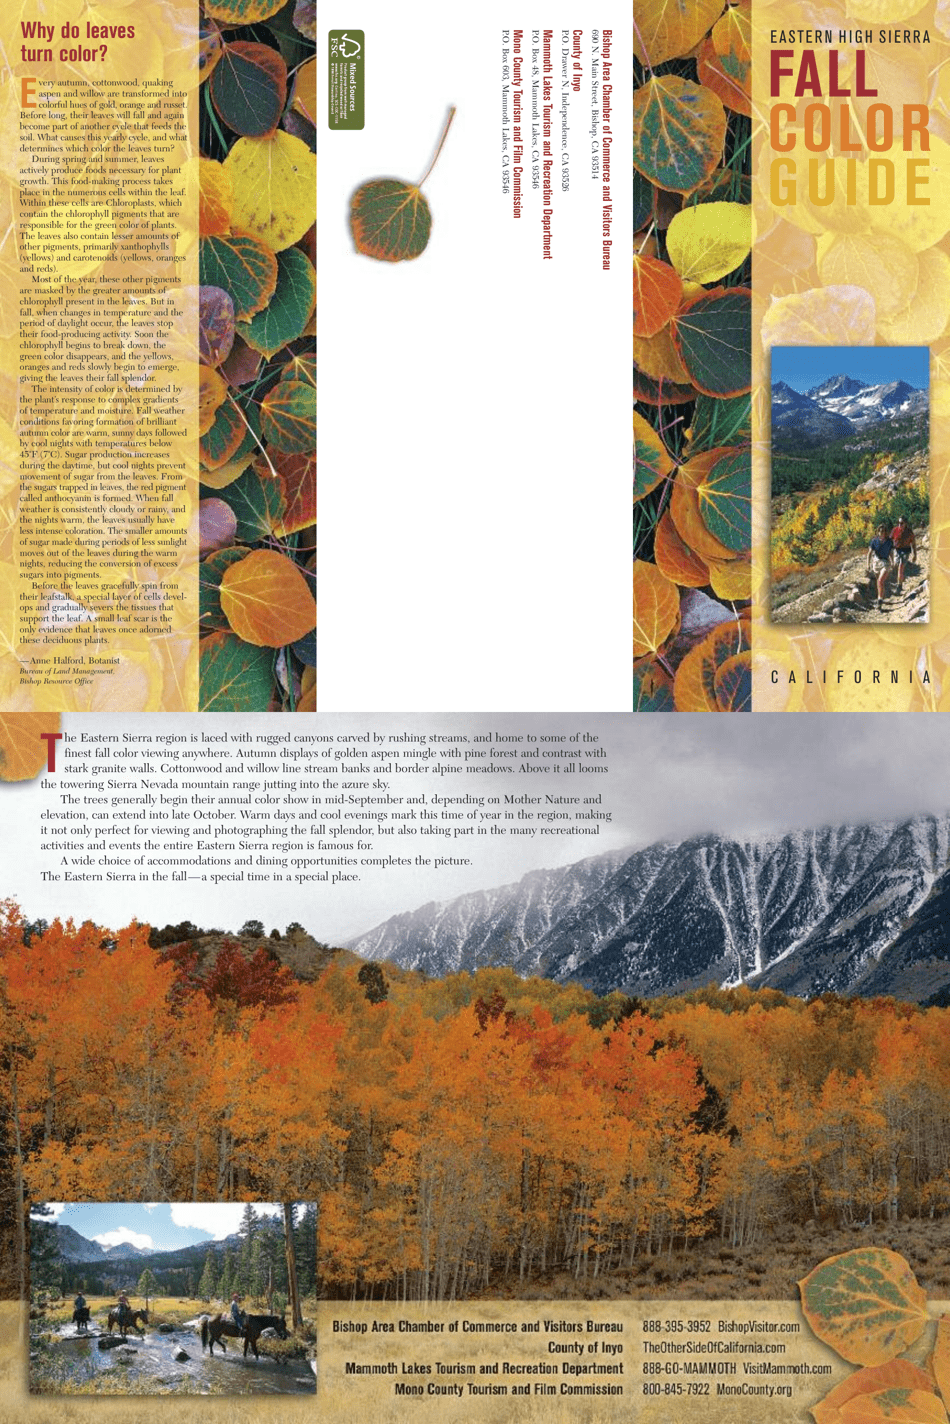 Fall Color Guide - Eastern High Sierra - California, Page 1